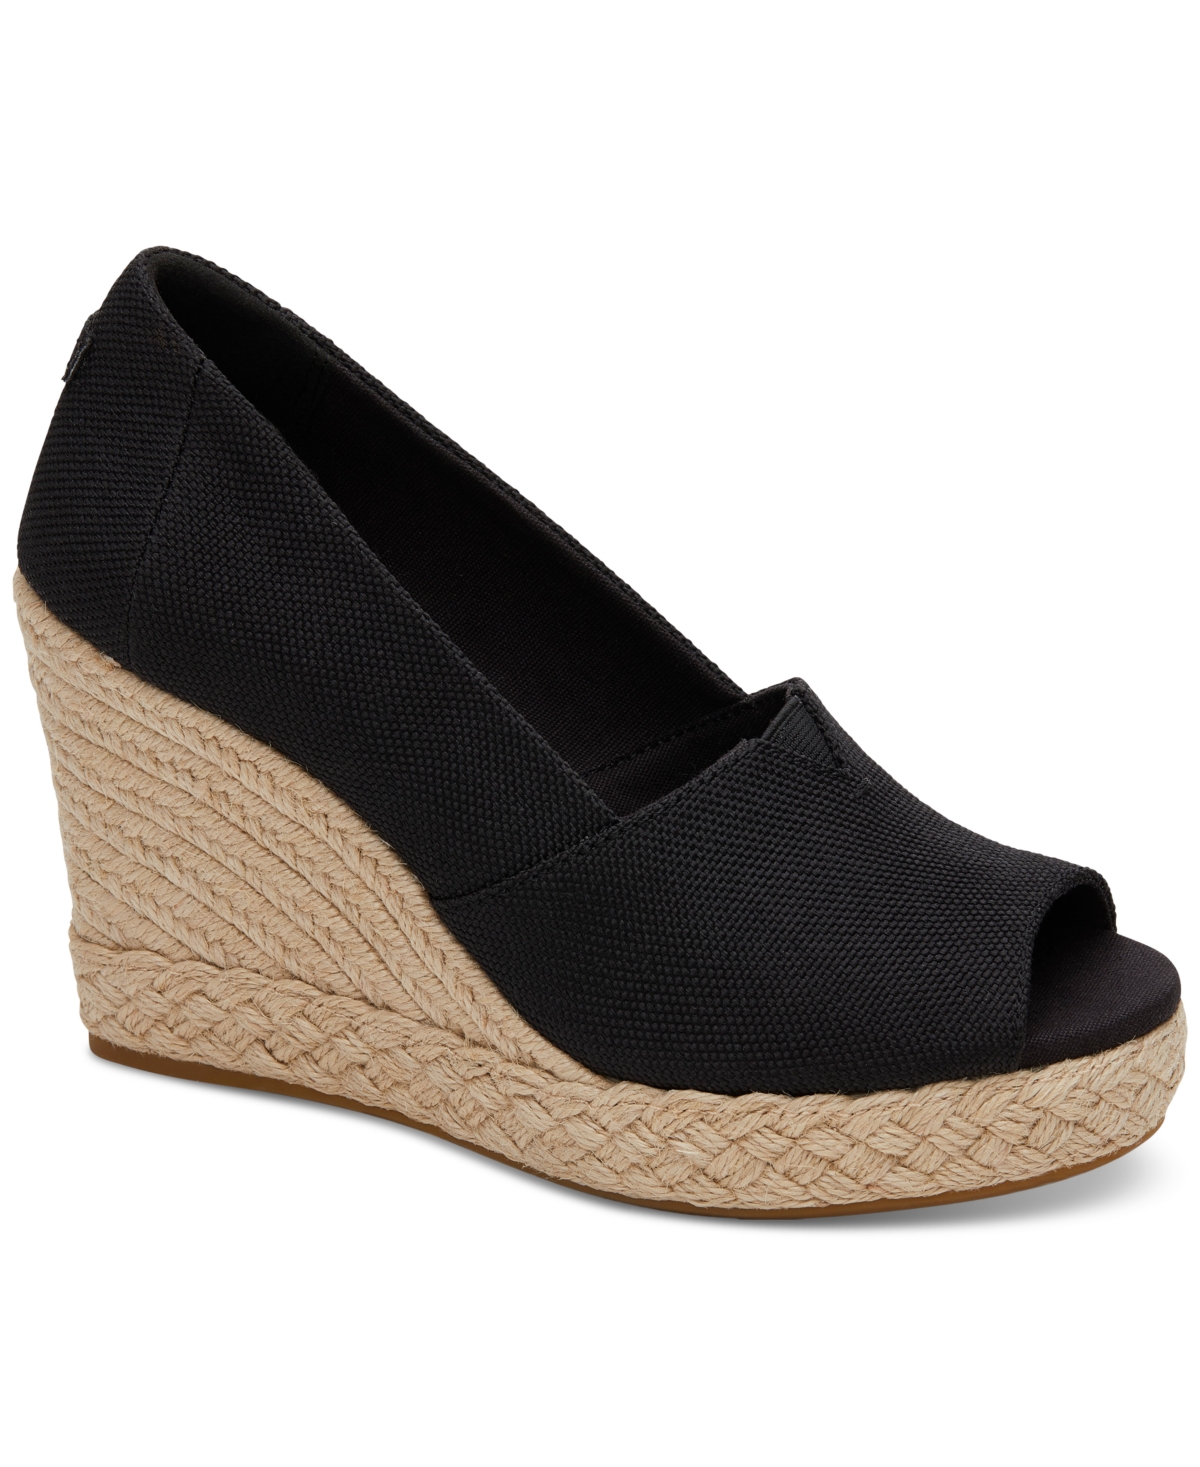 TOMS WOMEN'S MICHELLE RECYCLED PEEP-TOE ESPADRILLE WEDGES